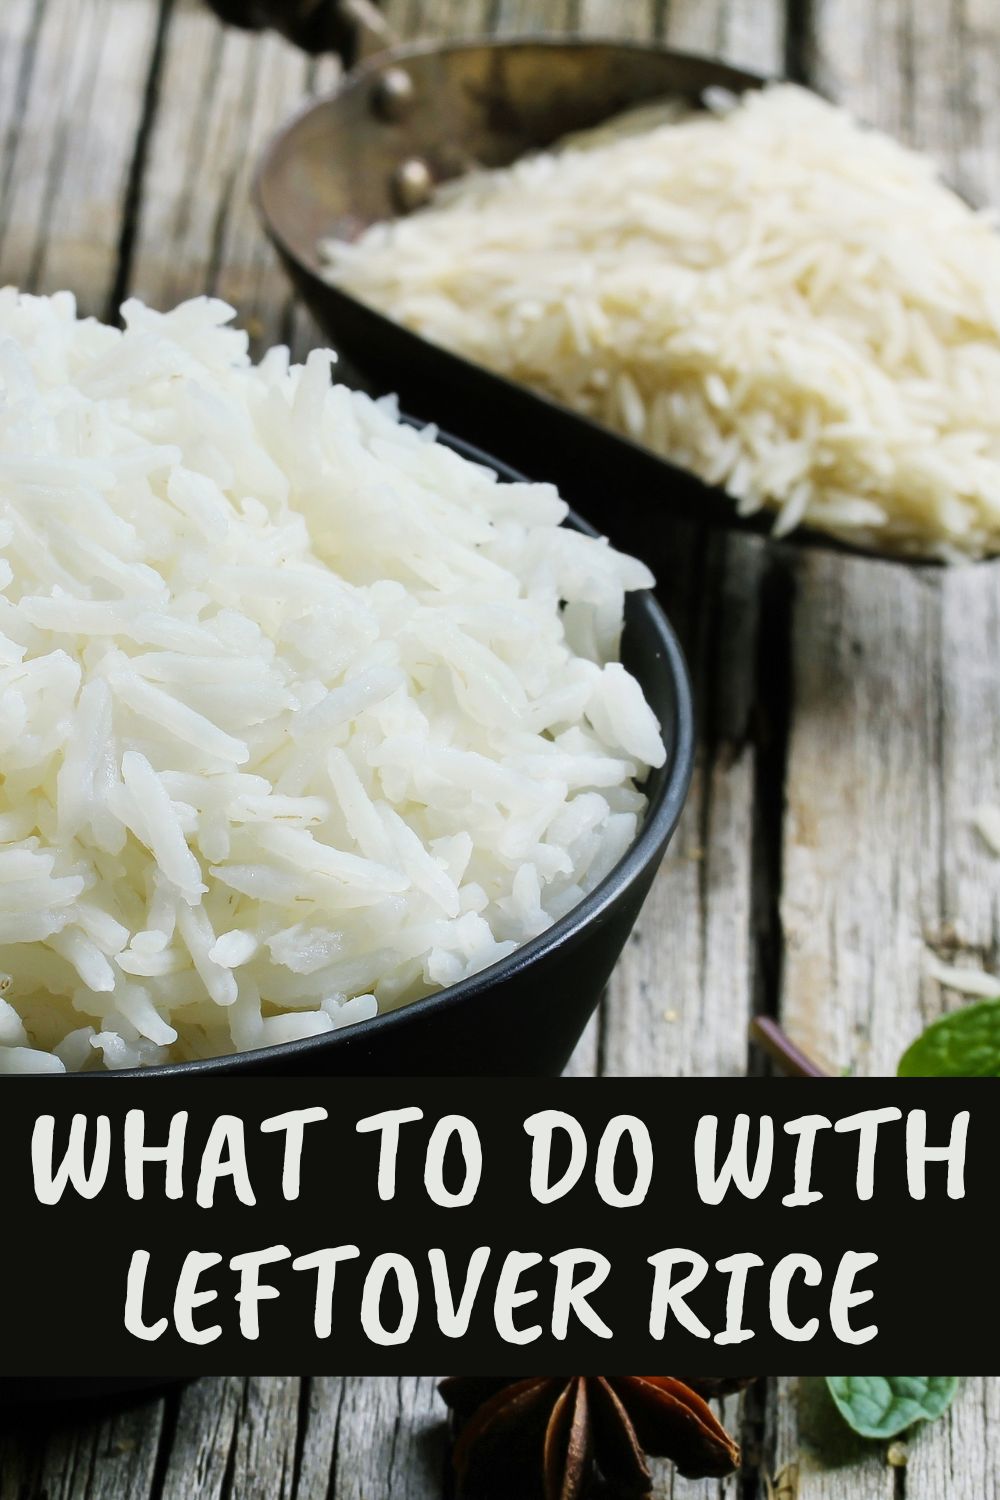 What to do with leftover rice.